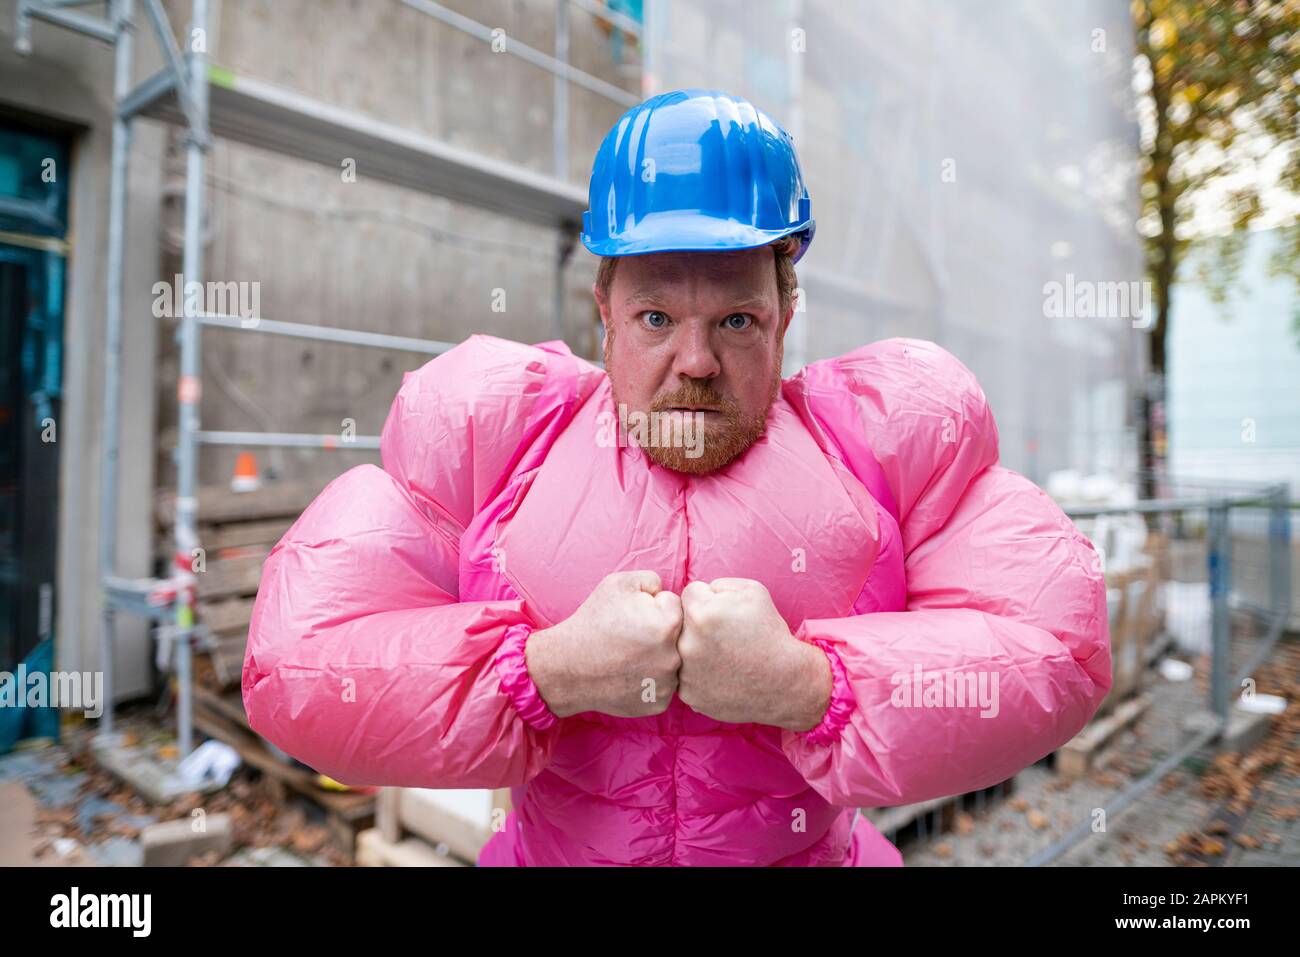 Portrait of man wearing pink bodybuilder costume and hard hat at construction site Stock Photo